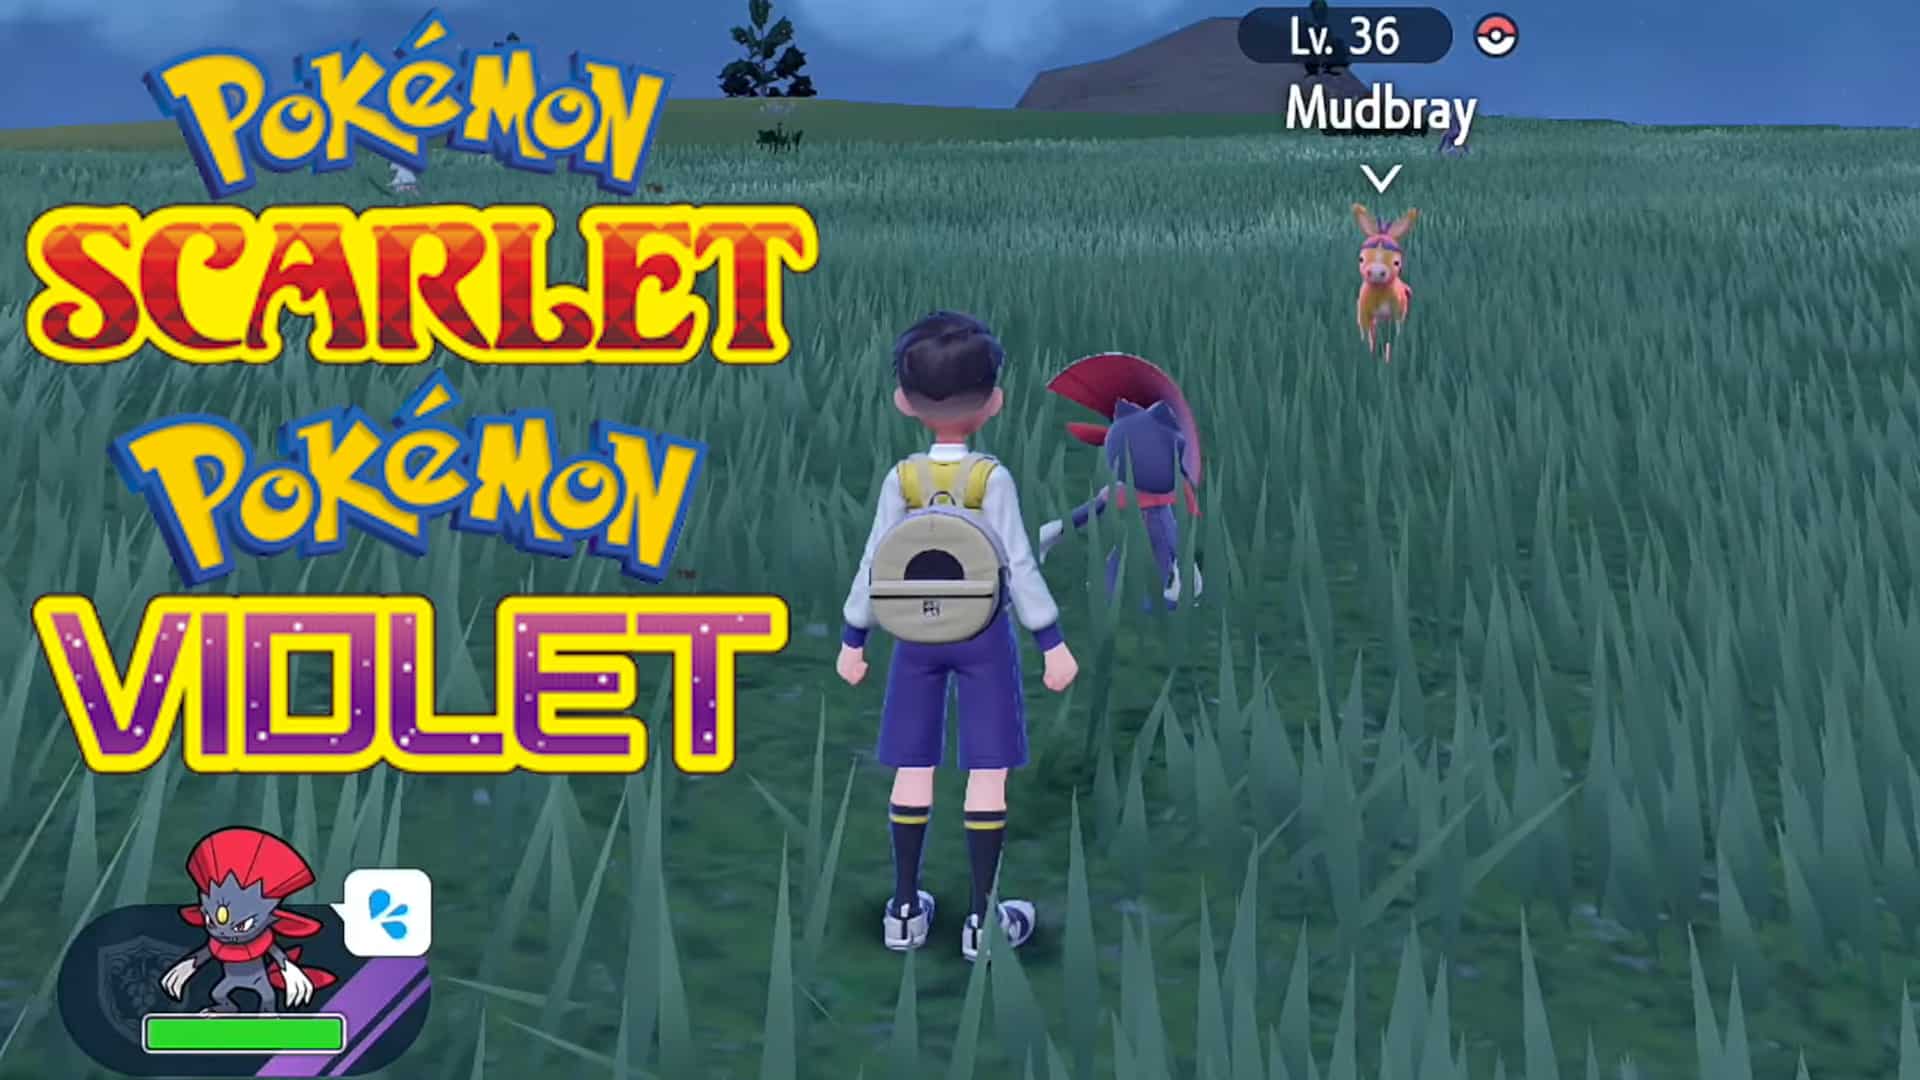 Pokemon Scarlet and Violet How To Find Shiny Pokemon & Sparkling Power